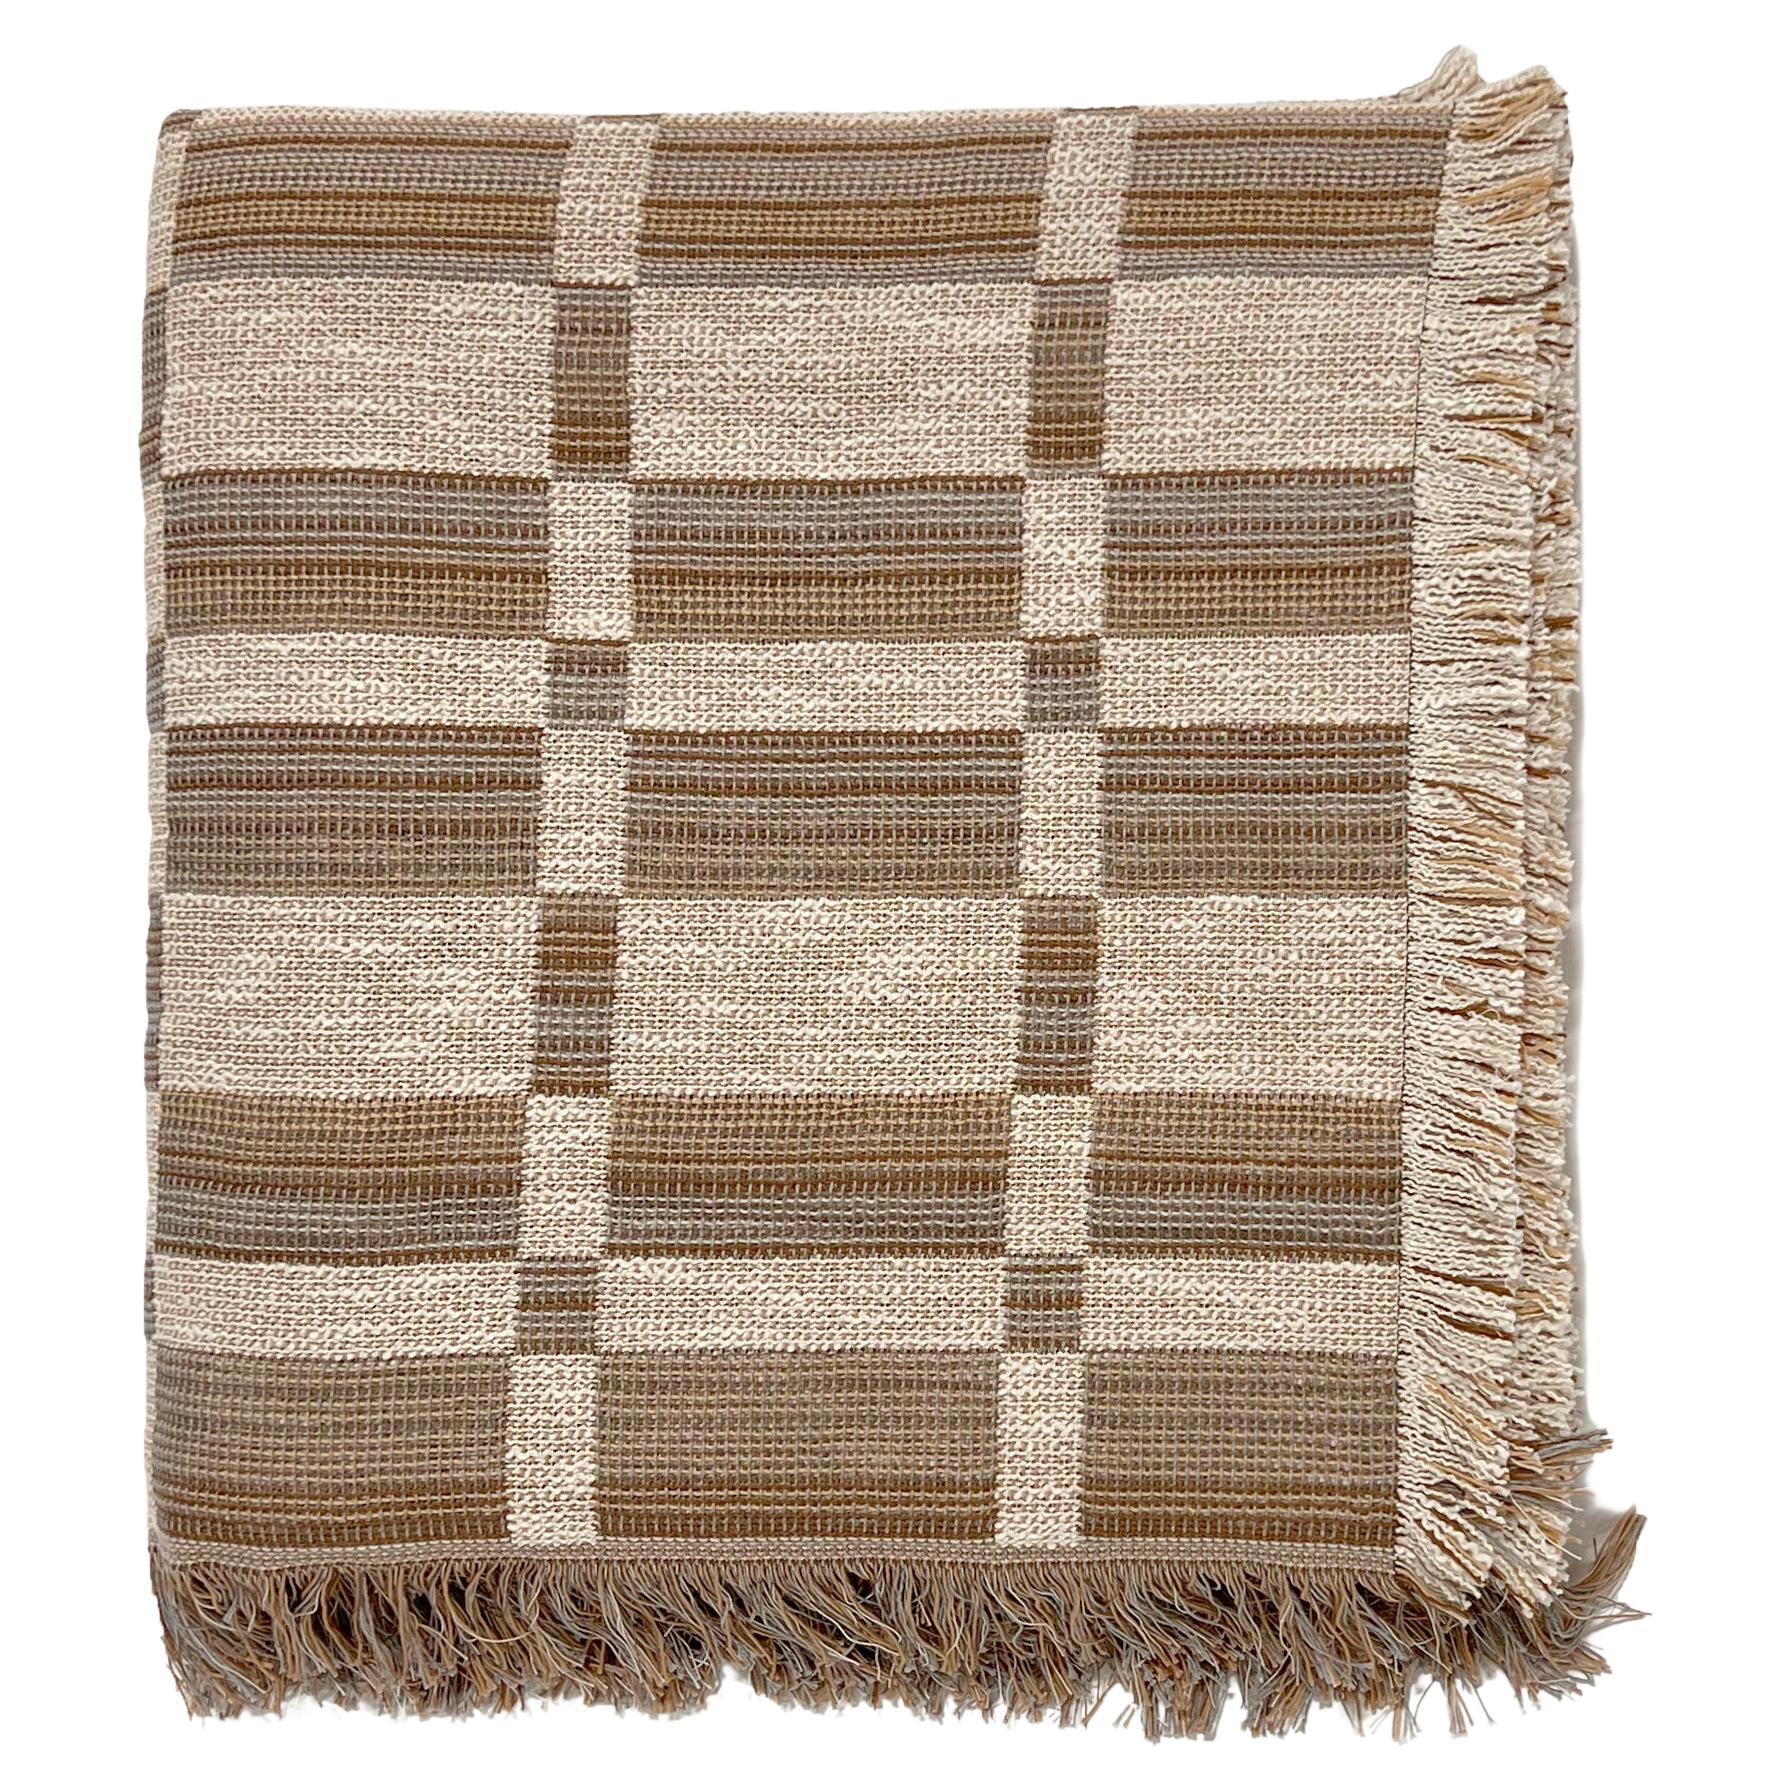 Patterned Woven Cotton Throw Blanket by Folk Textiles (Joaquin / Charcoal)